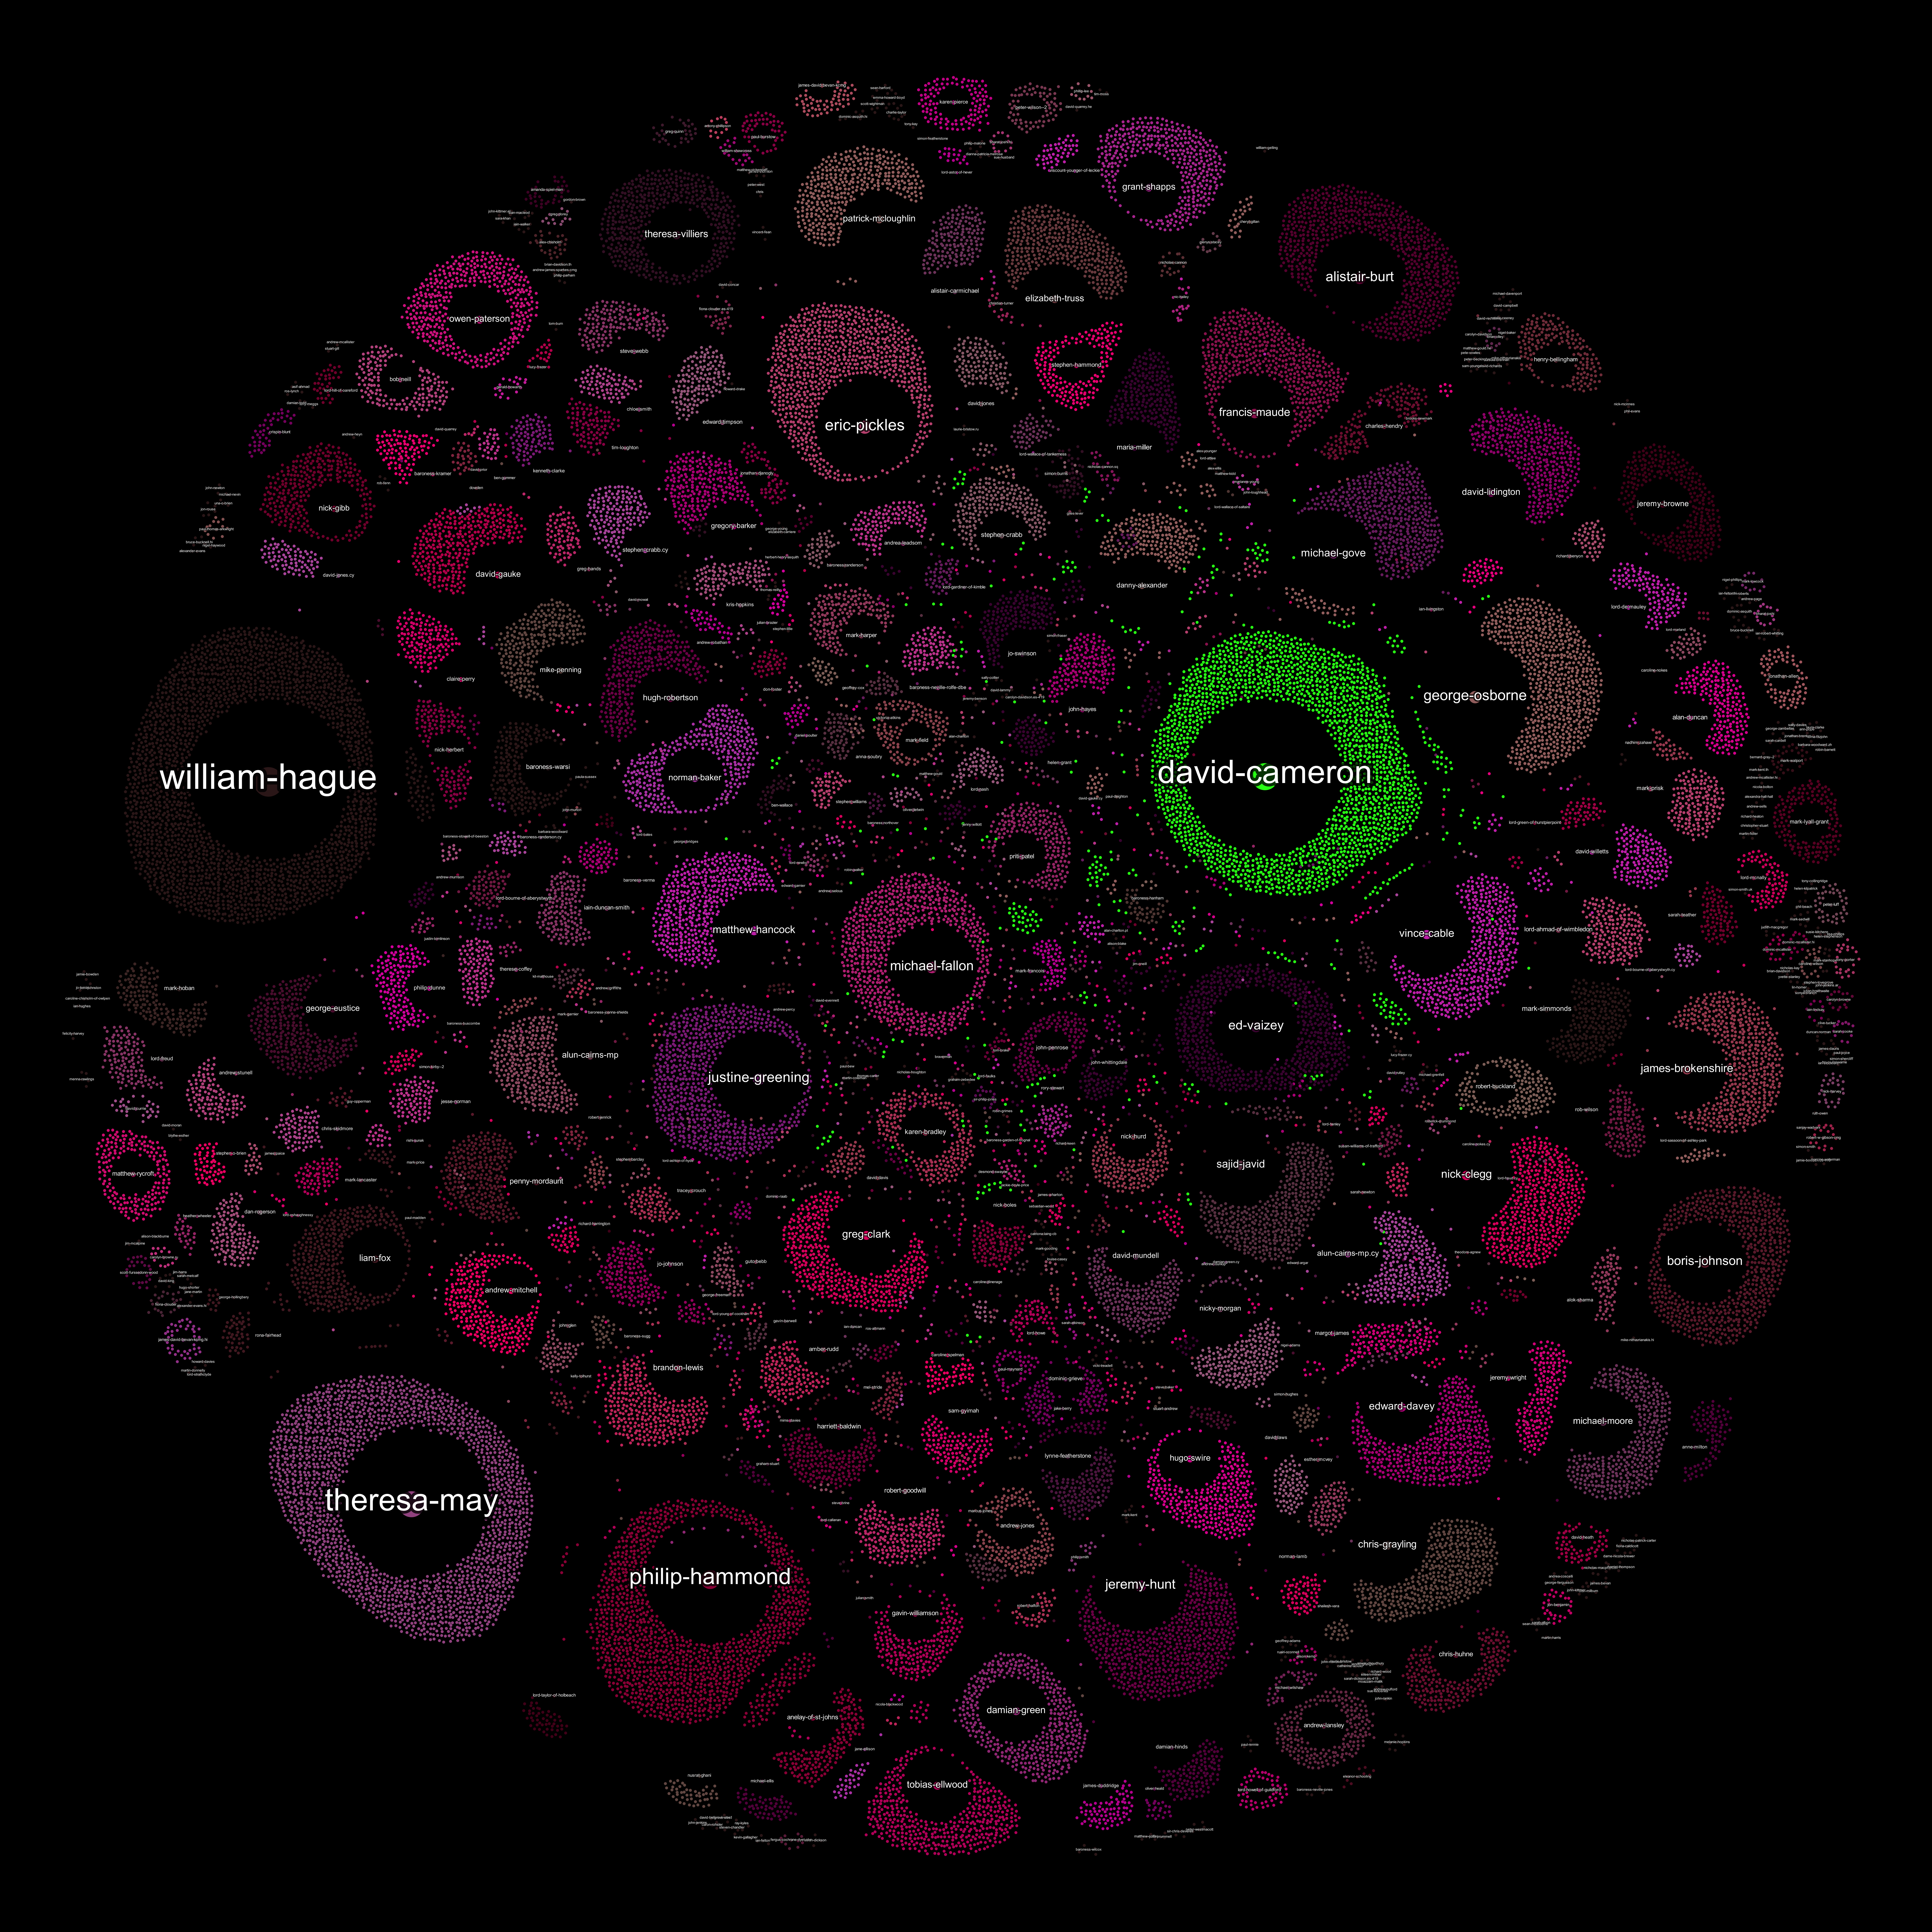 The previous network but coloured to highlight David Cameron’s ego network. Full size (10240x10240)..